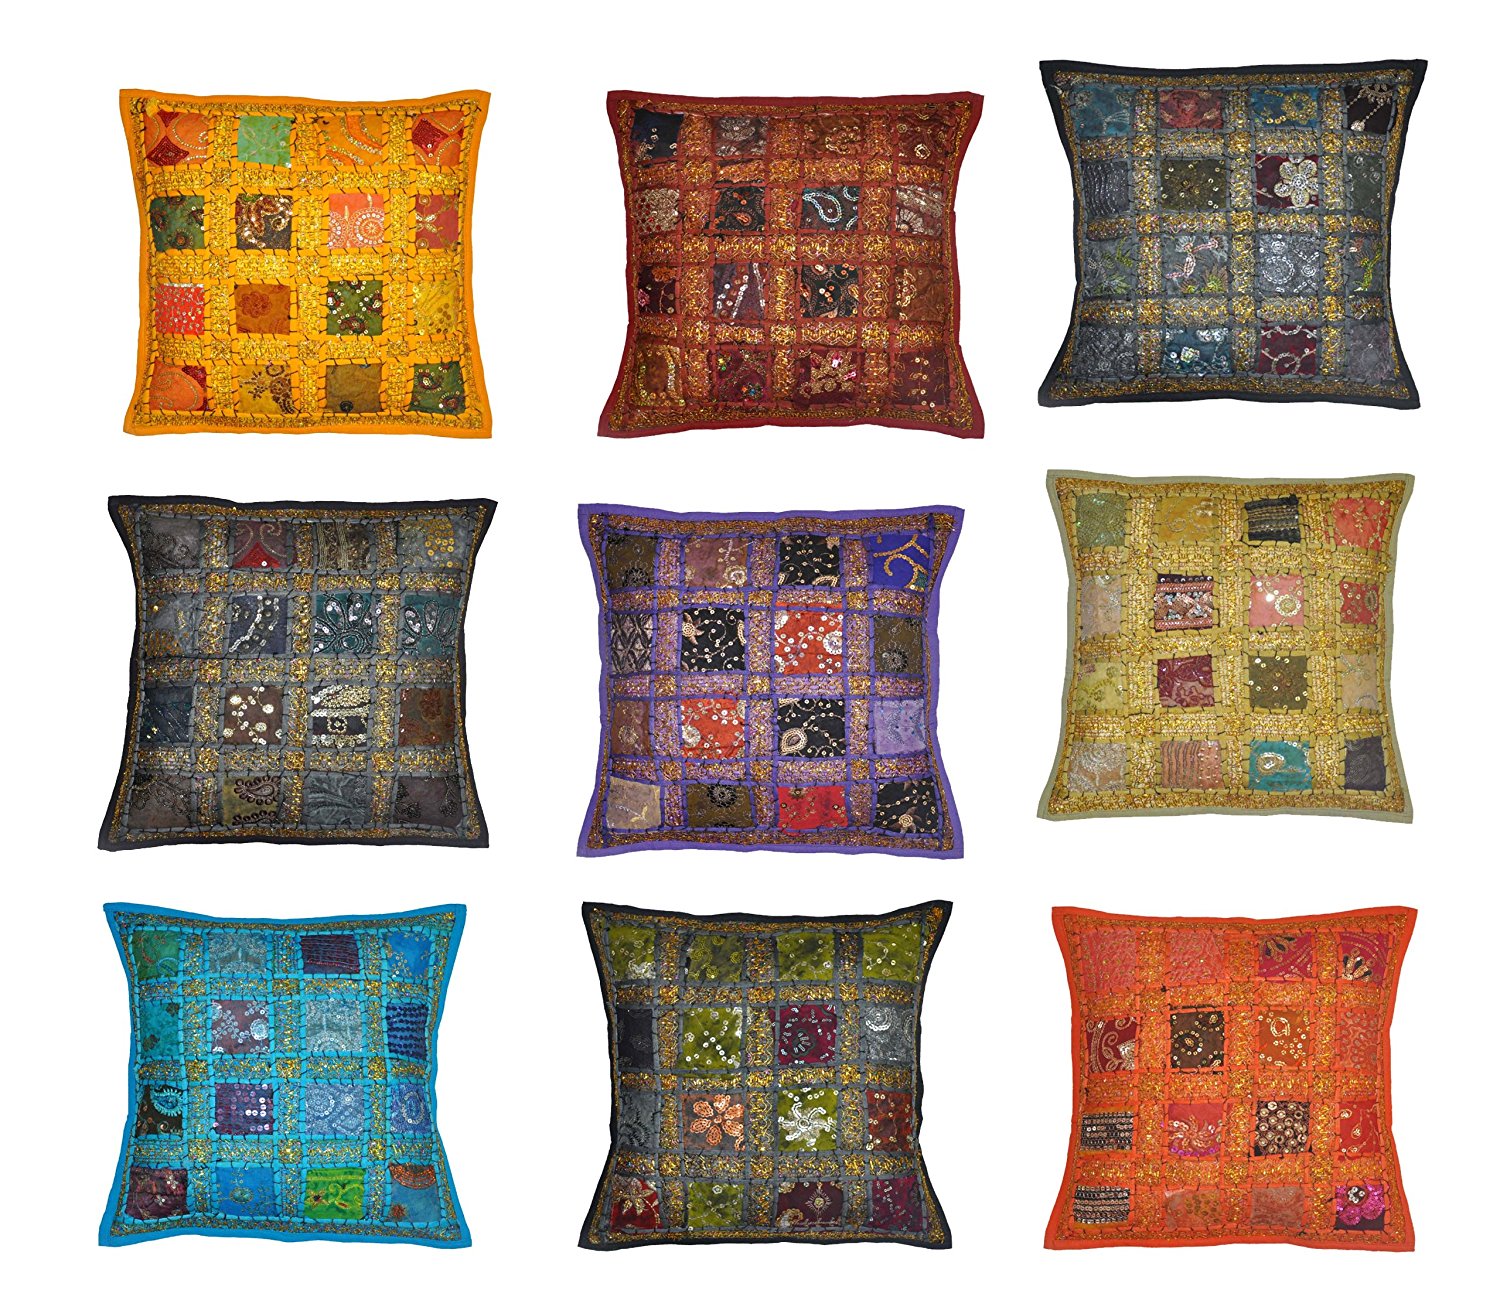 10 Pcs Lot 16 X 16 Inches Rajasthali Indian Decor Handmade Cotton Cushion Cover Pillow Covers